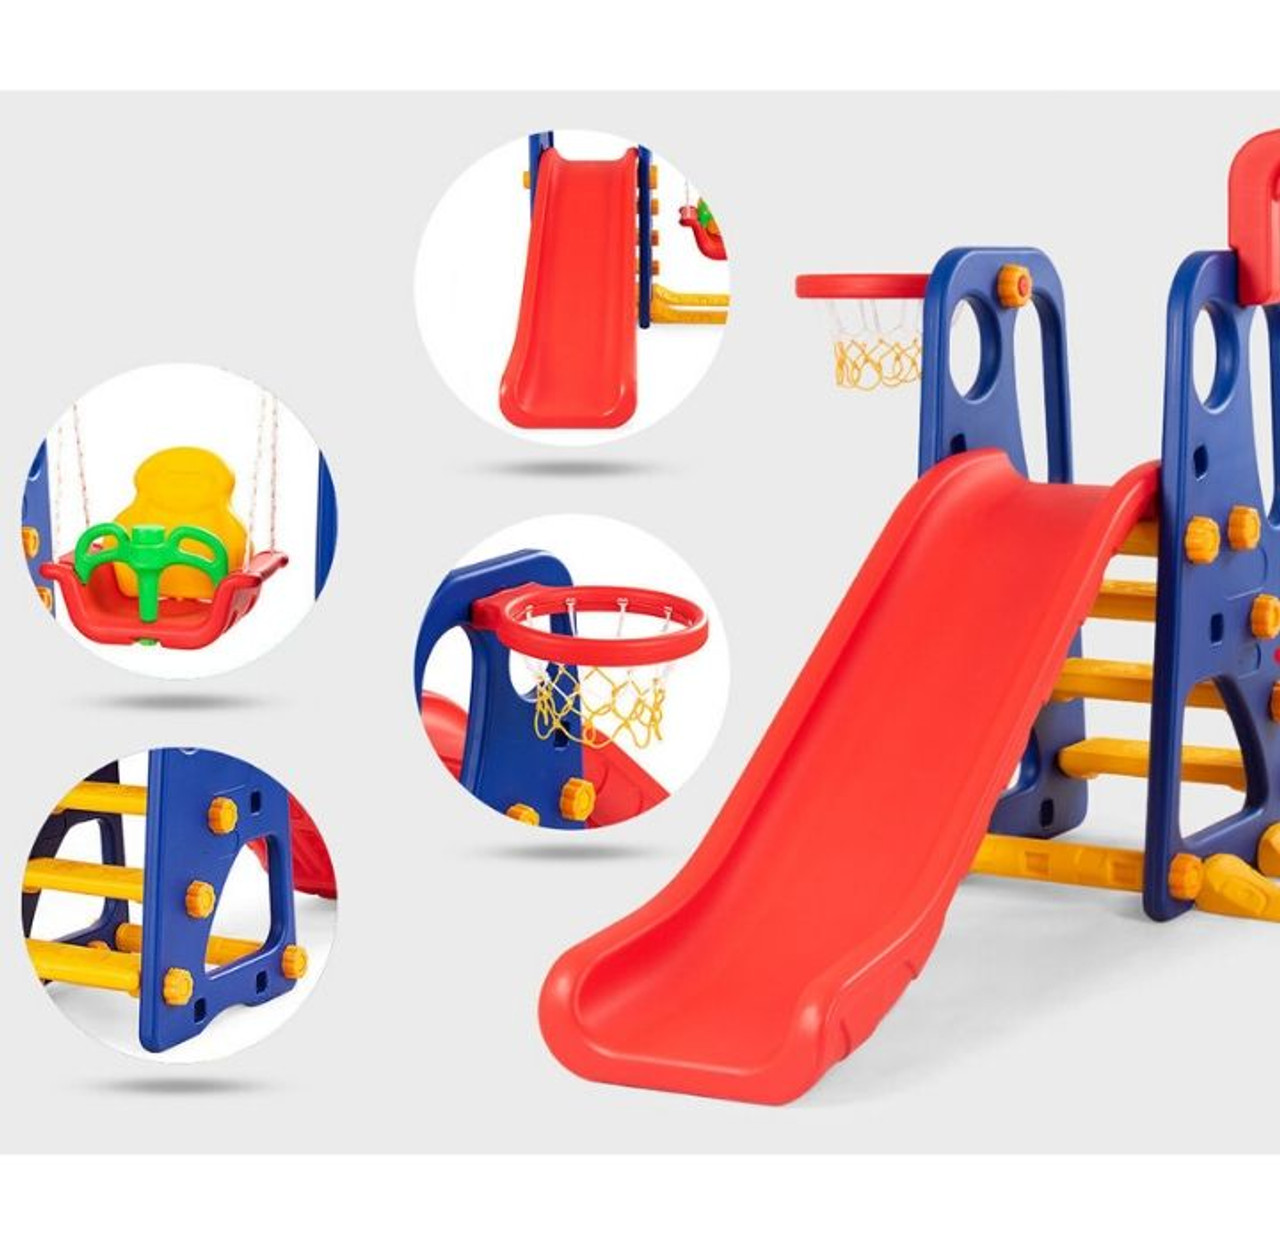 Toddler 3-in-1 Swing Set with Slide & Basketball Hoop product image